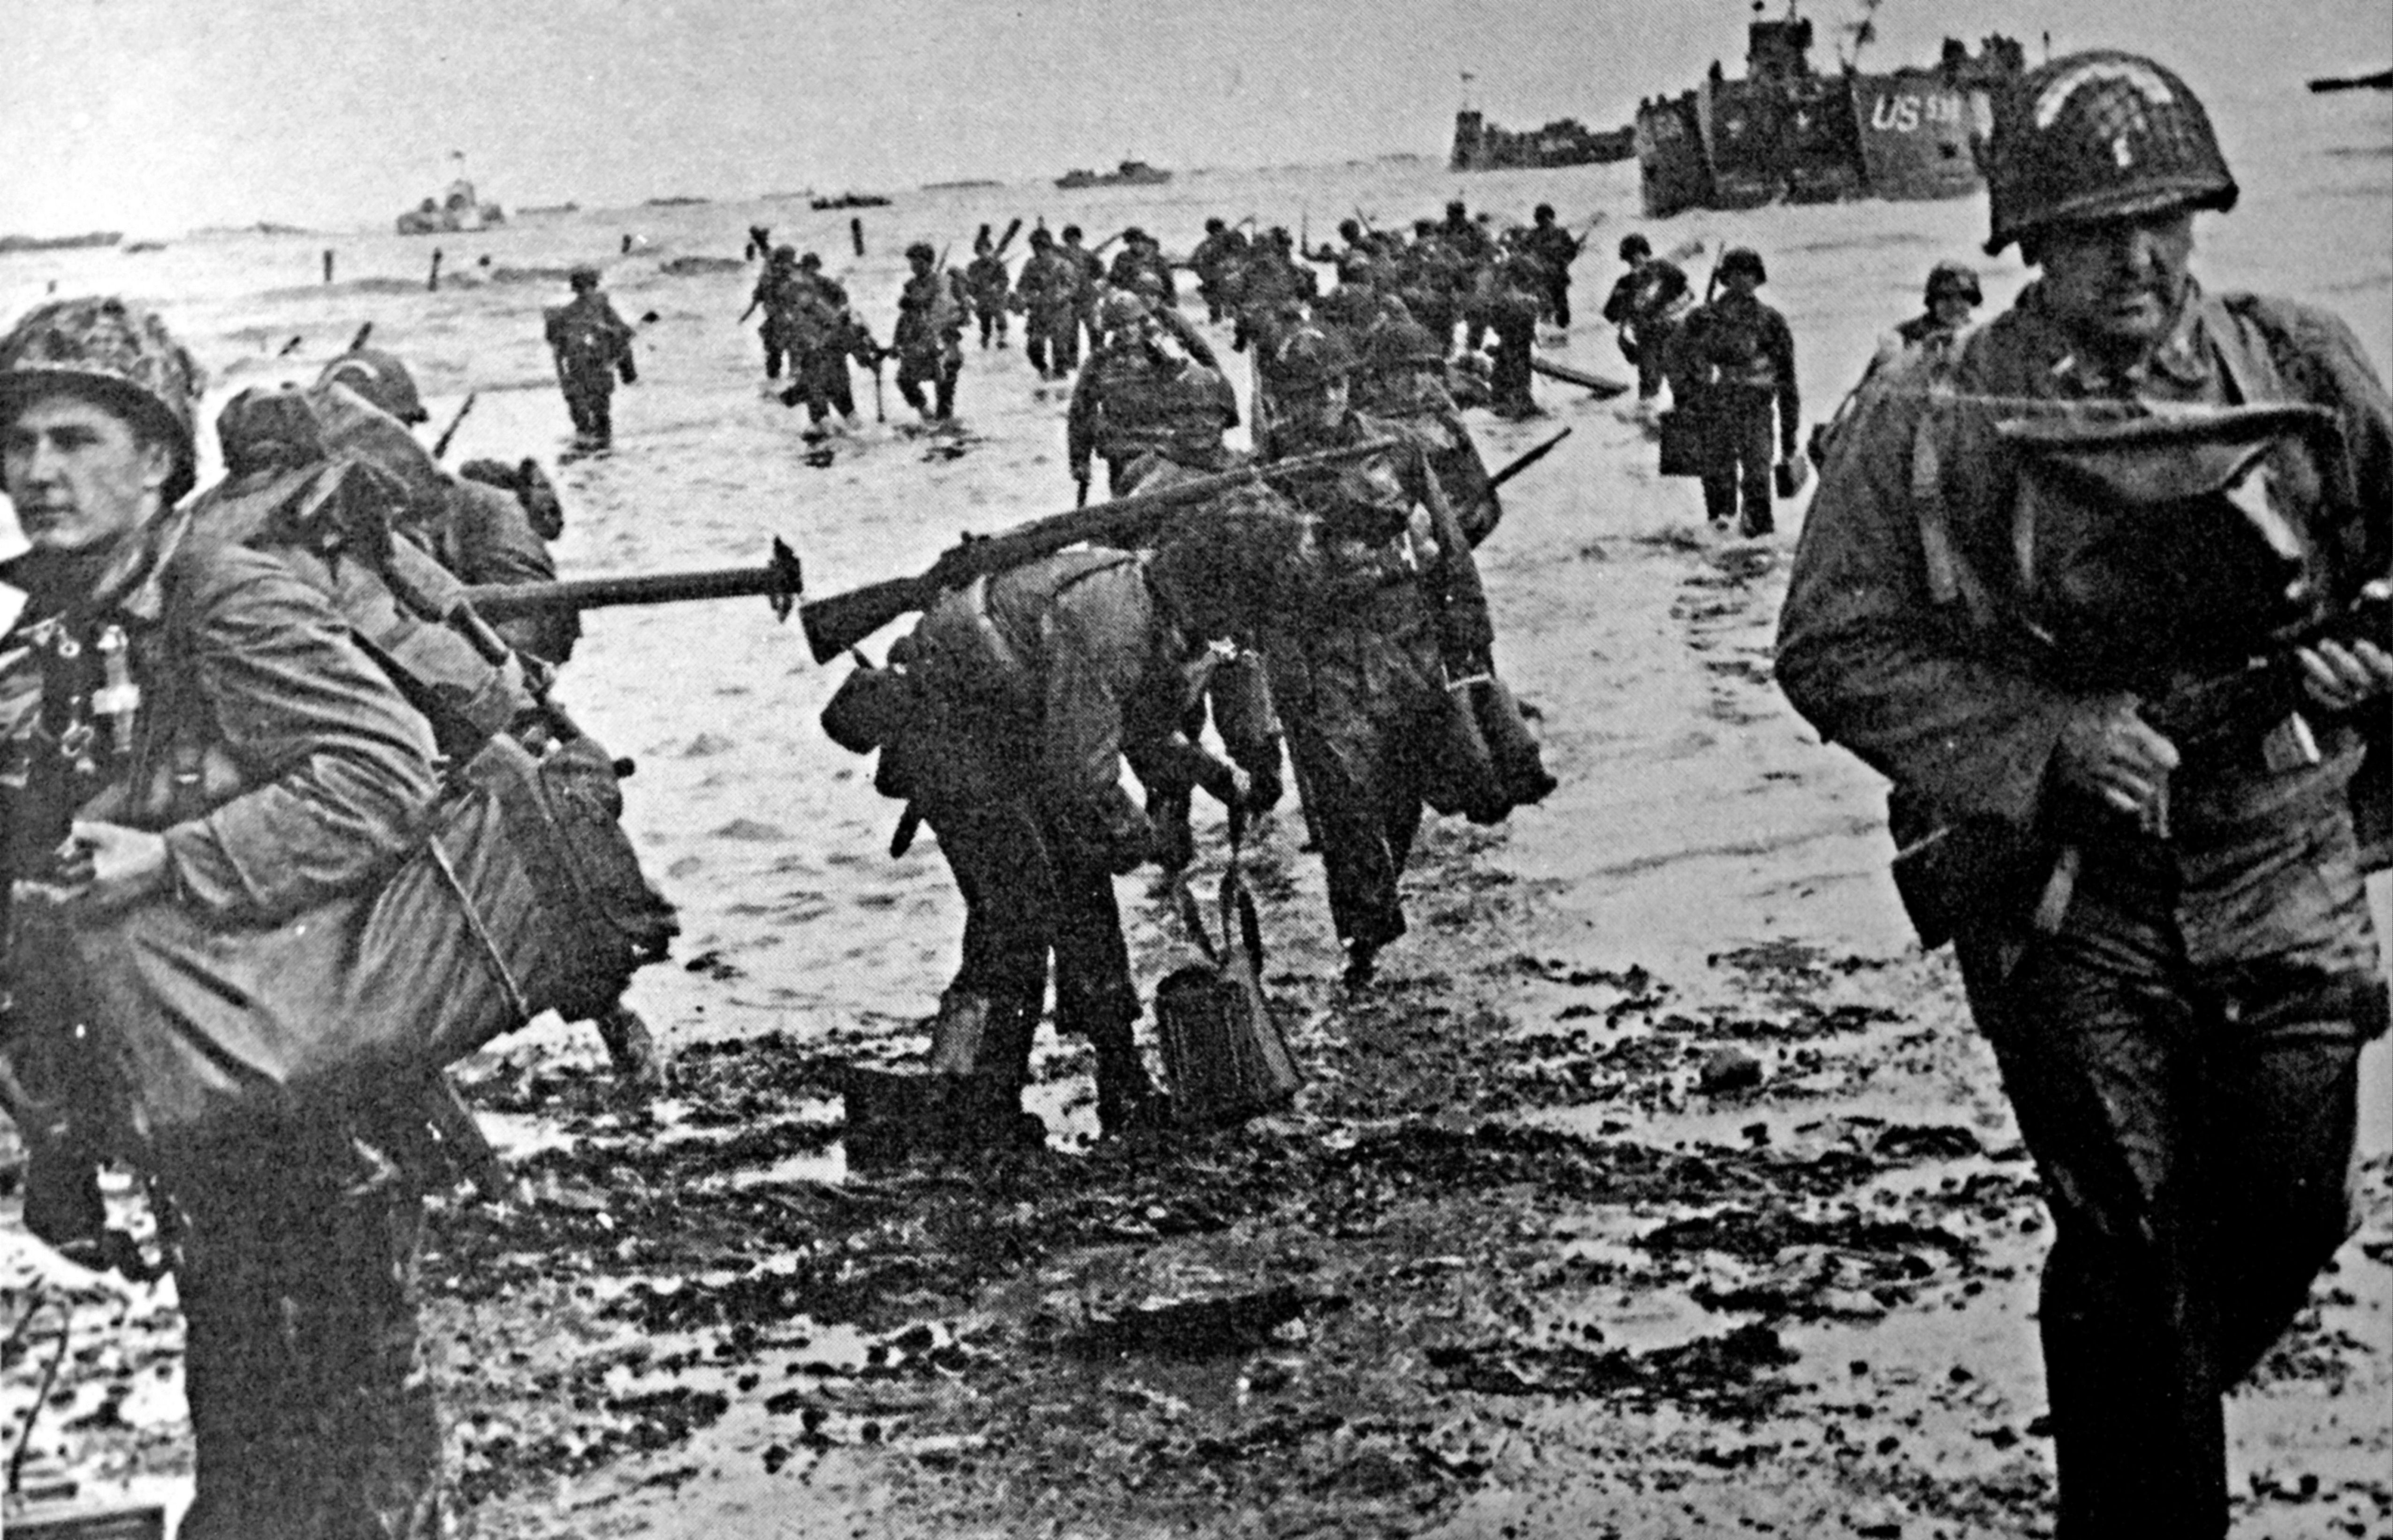 Normandy Landings 2017: What The D In 'D Day' Actually Means